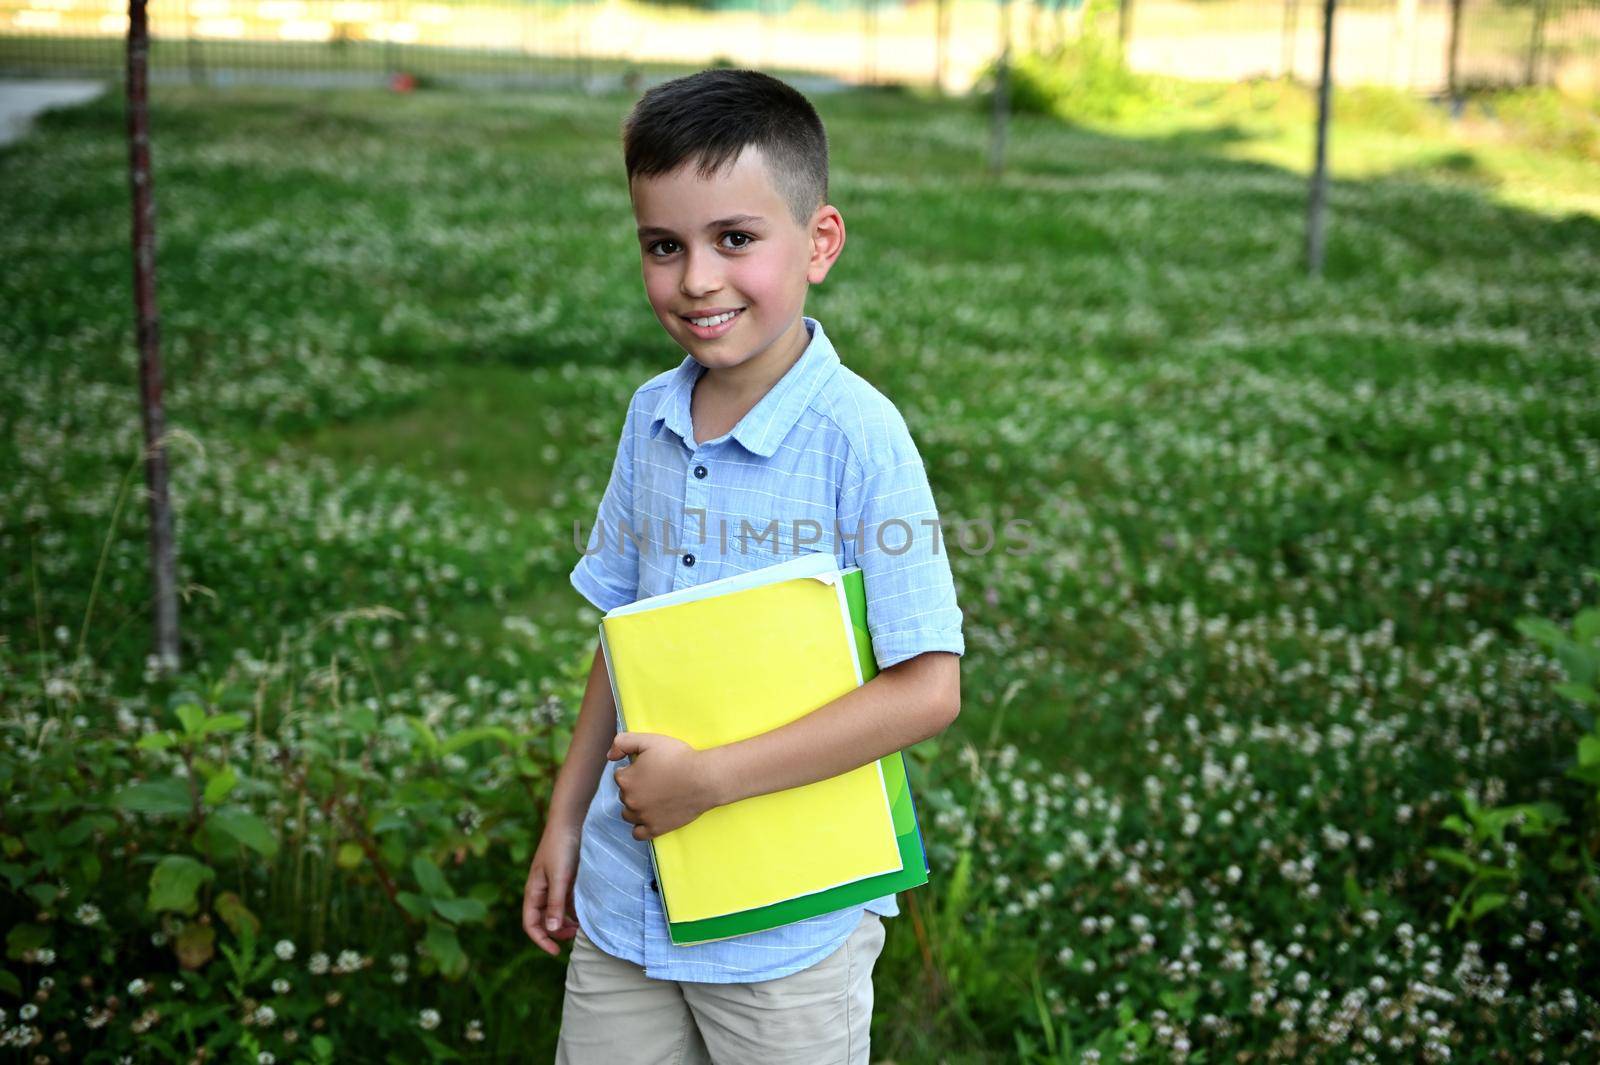 Happy elementary student coming back to school. Adorable schoolboy holding a workbooks and smiling to camera standing on green grass background.